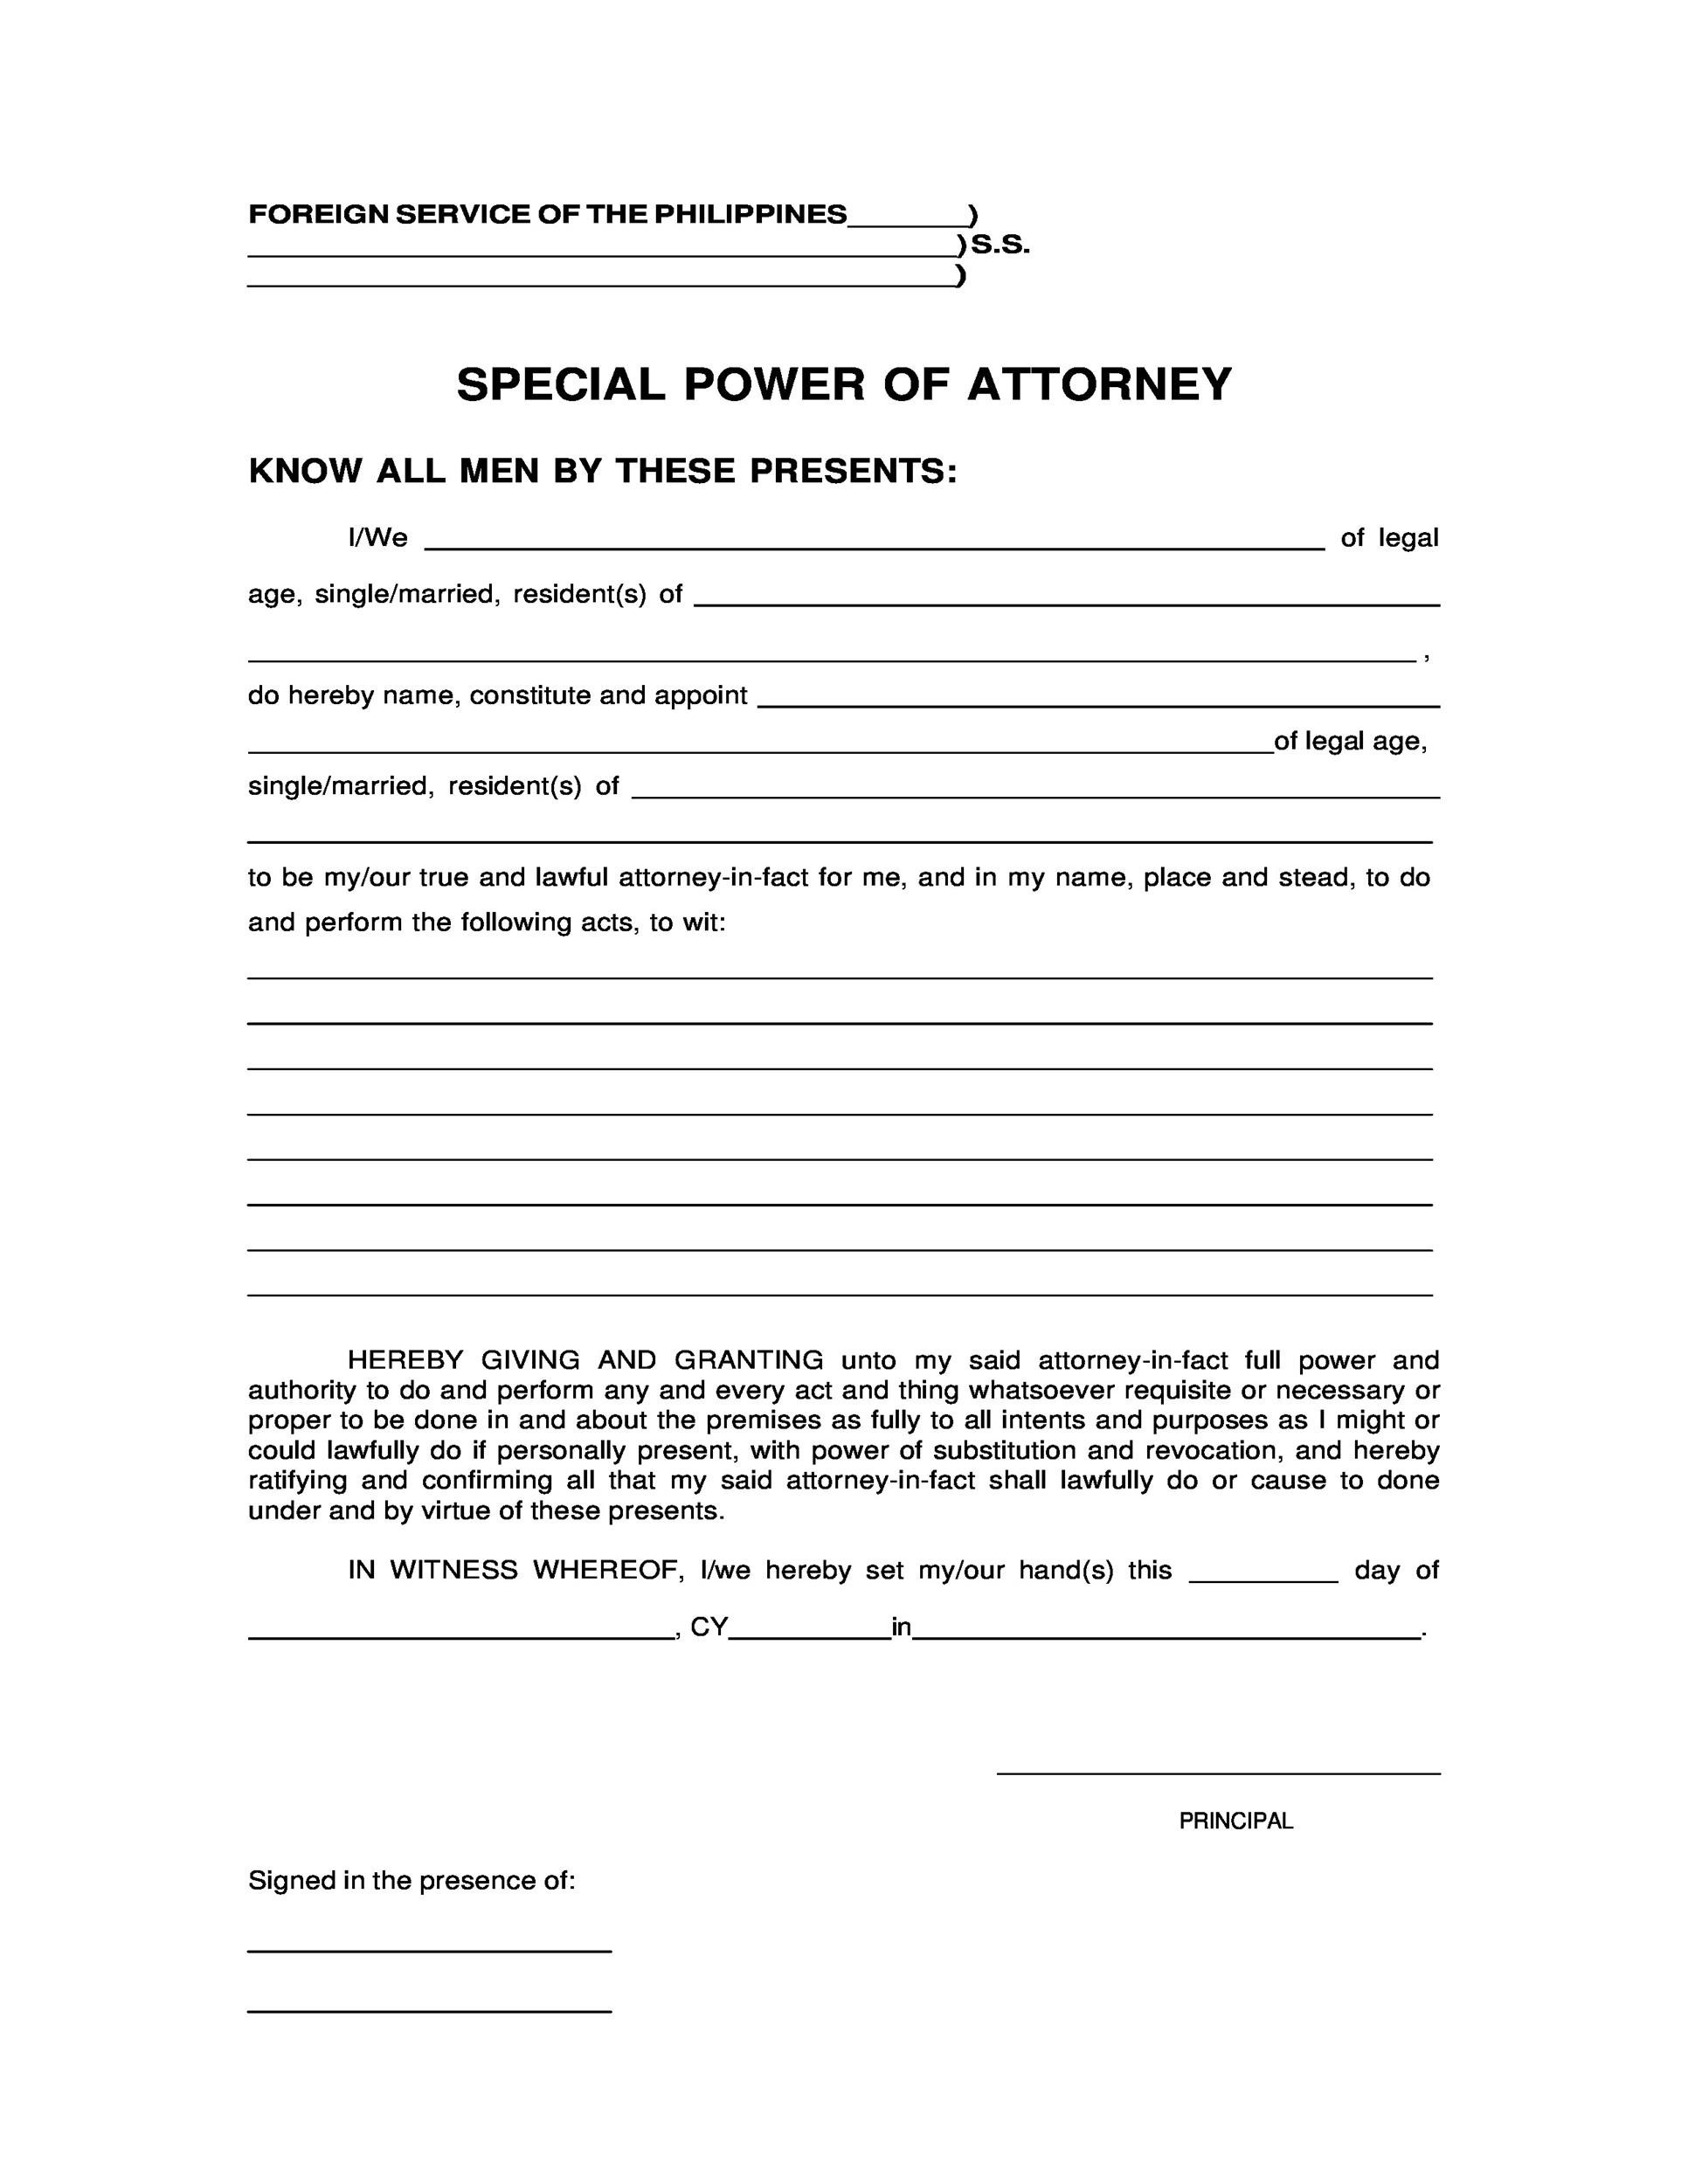 50 Free Power of Attorney Forms Templates (Durable Medical General)